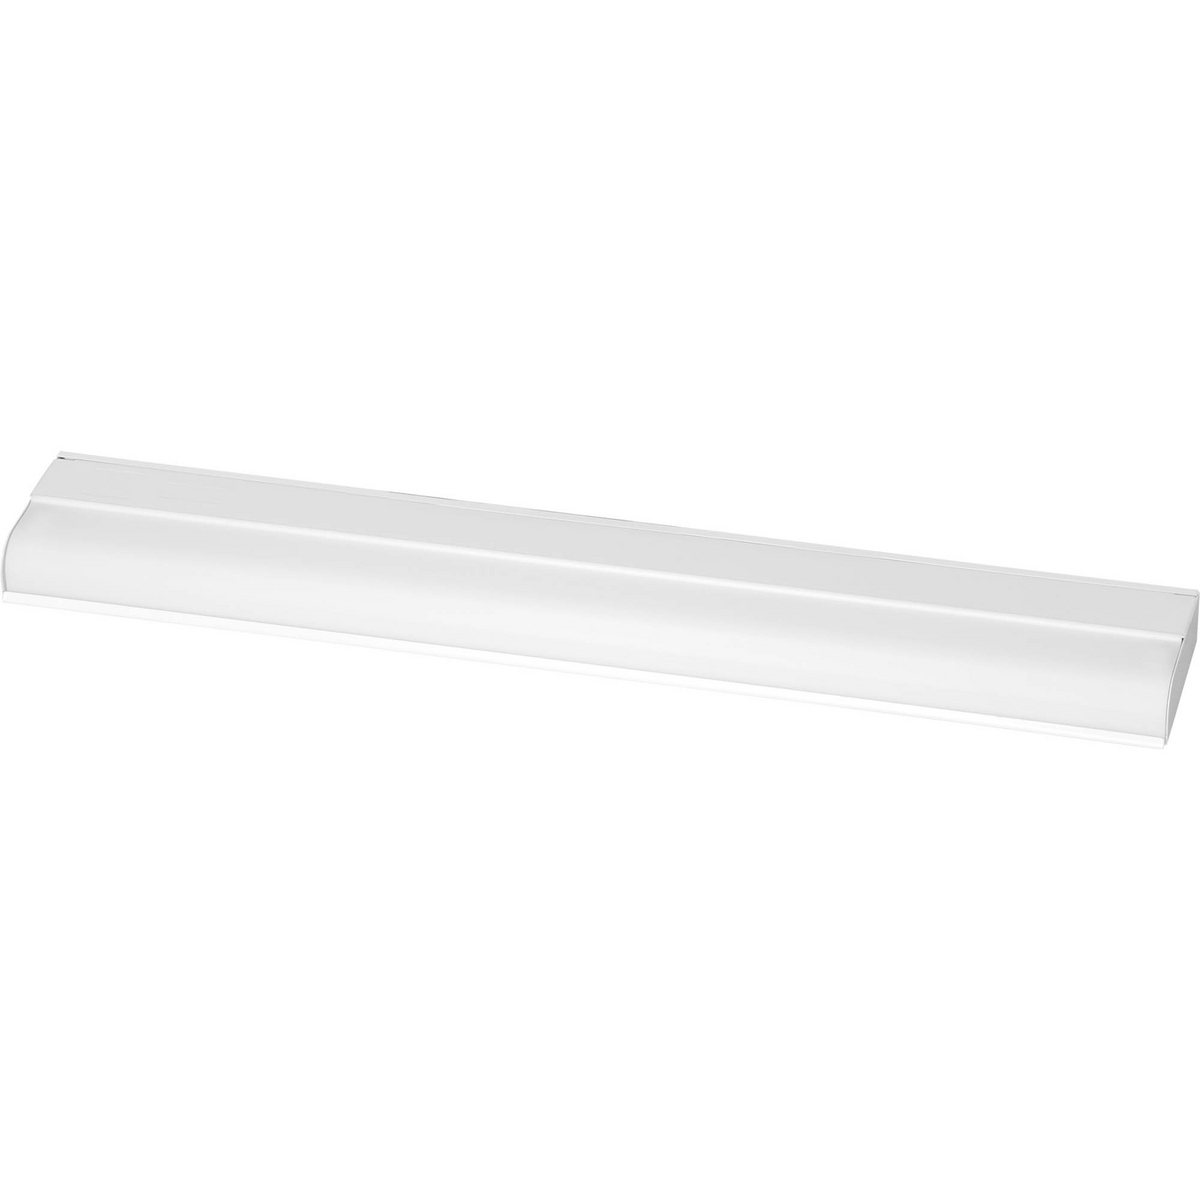 21 in CFL undercabinet fixture. Mount easily under cabinets and shelves, over a desk, in kitchens or any work area. All have a white acrylic diffuser and white baked enamel housing. 120V NPF electronic ballast. T-5 bulb.